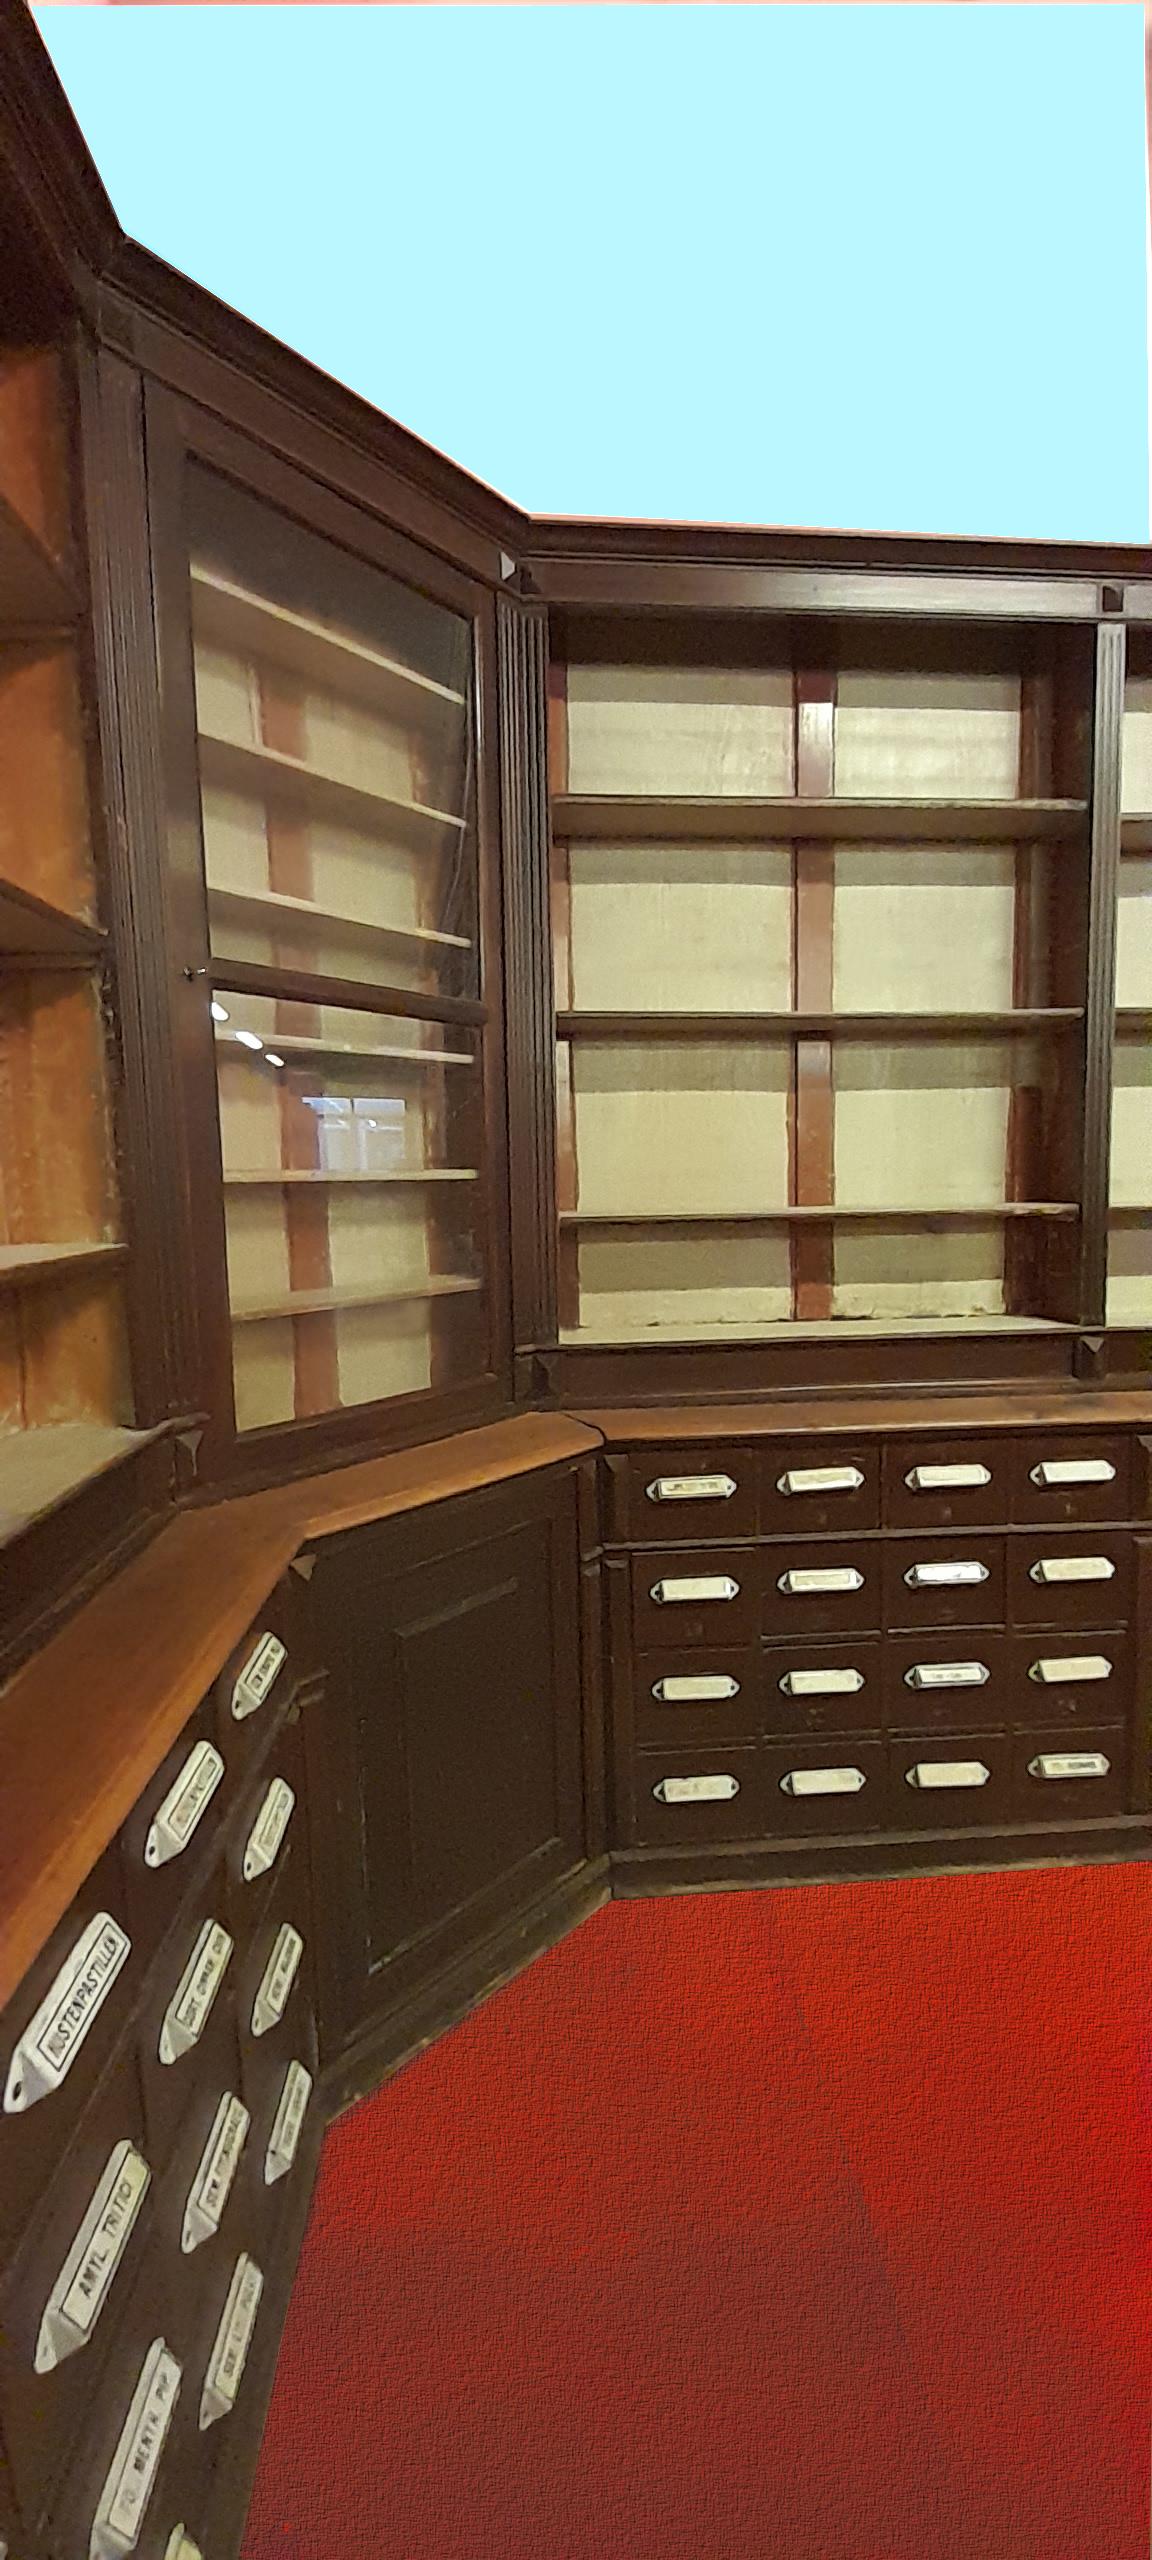 herbal apothecary cabinet